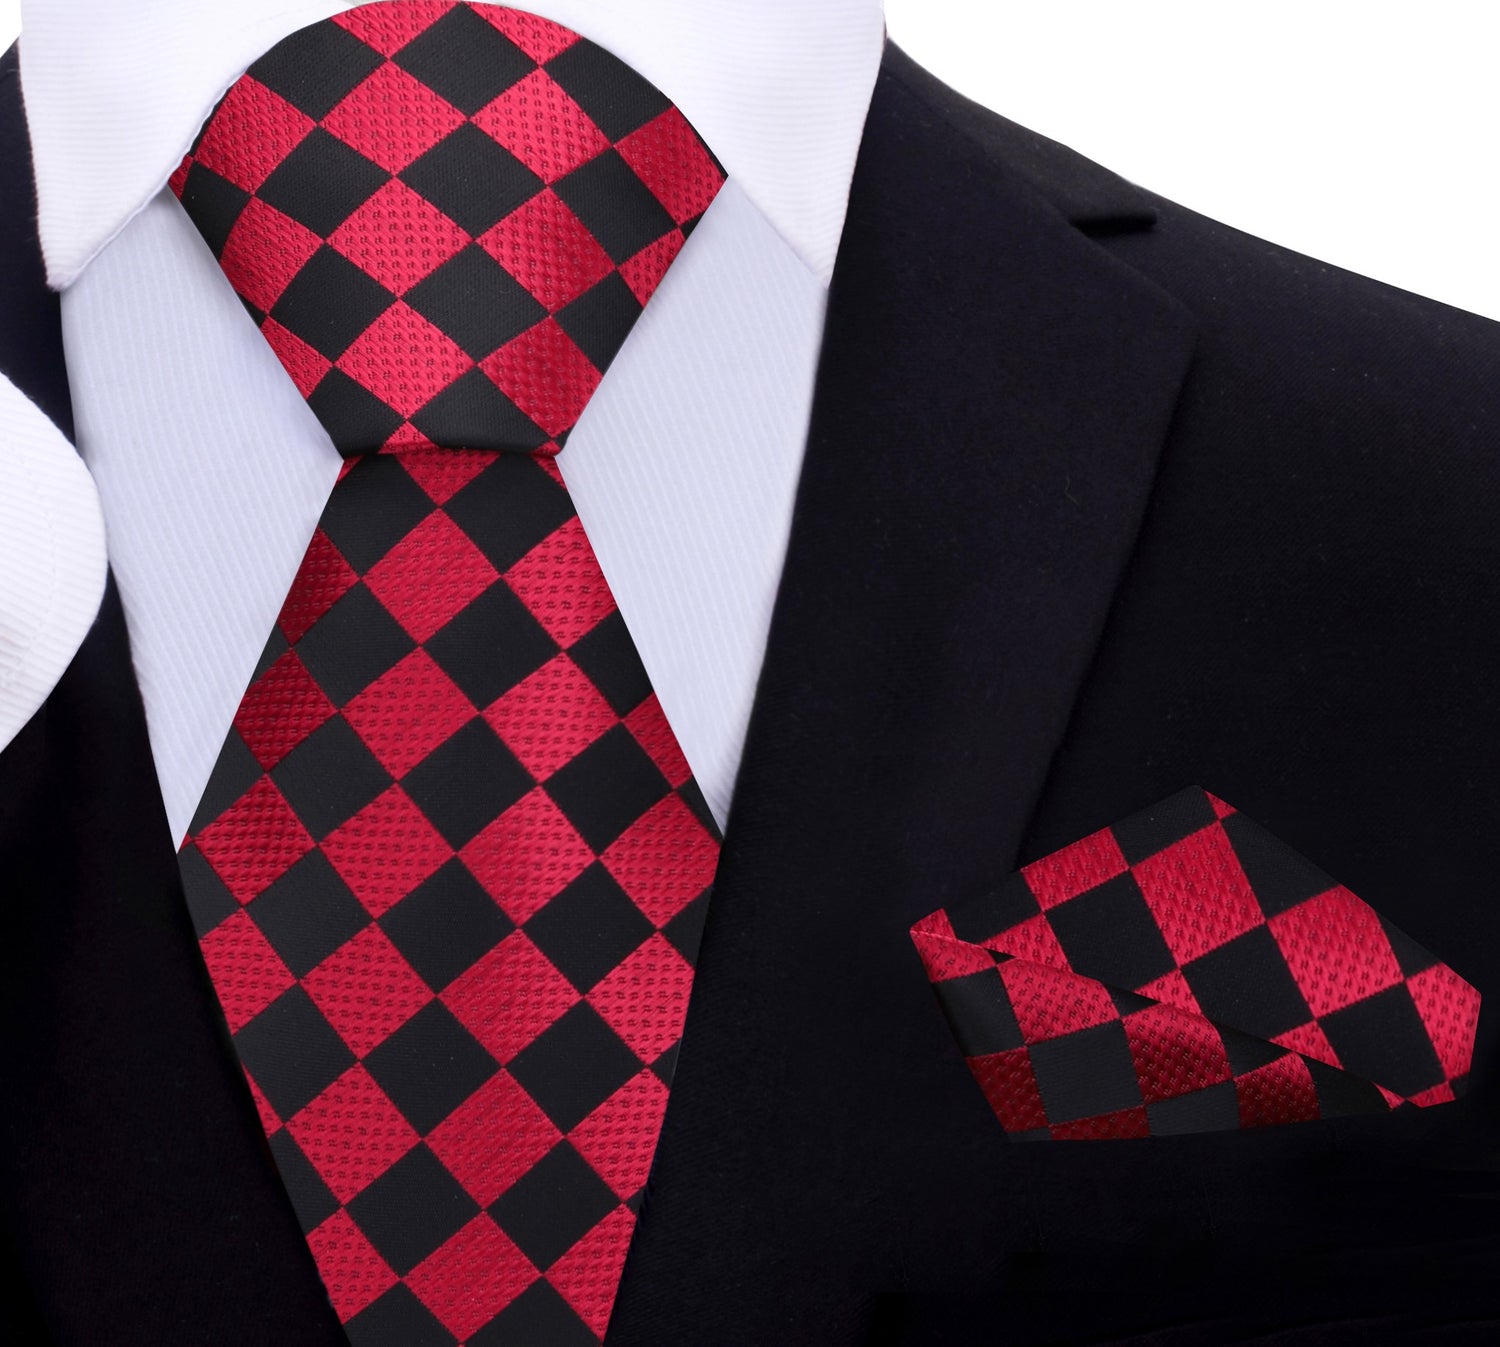 Red, black geometric tie and pocket square